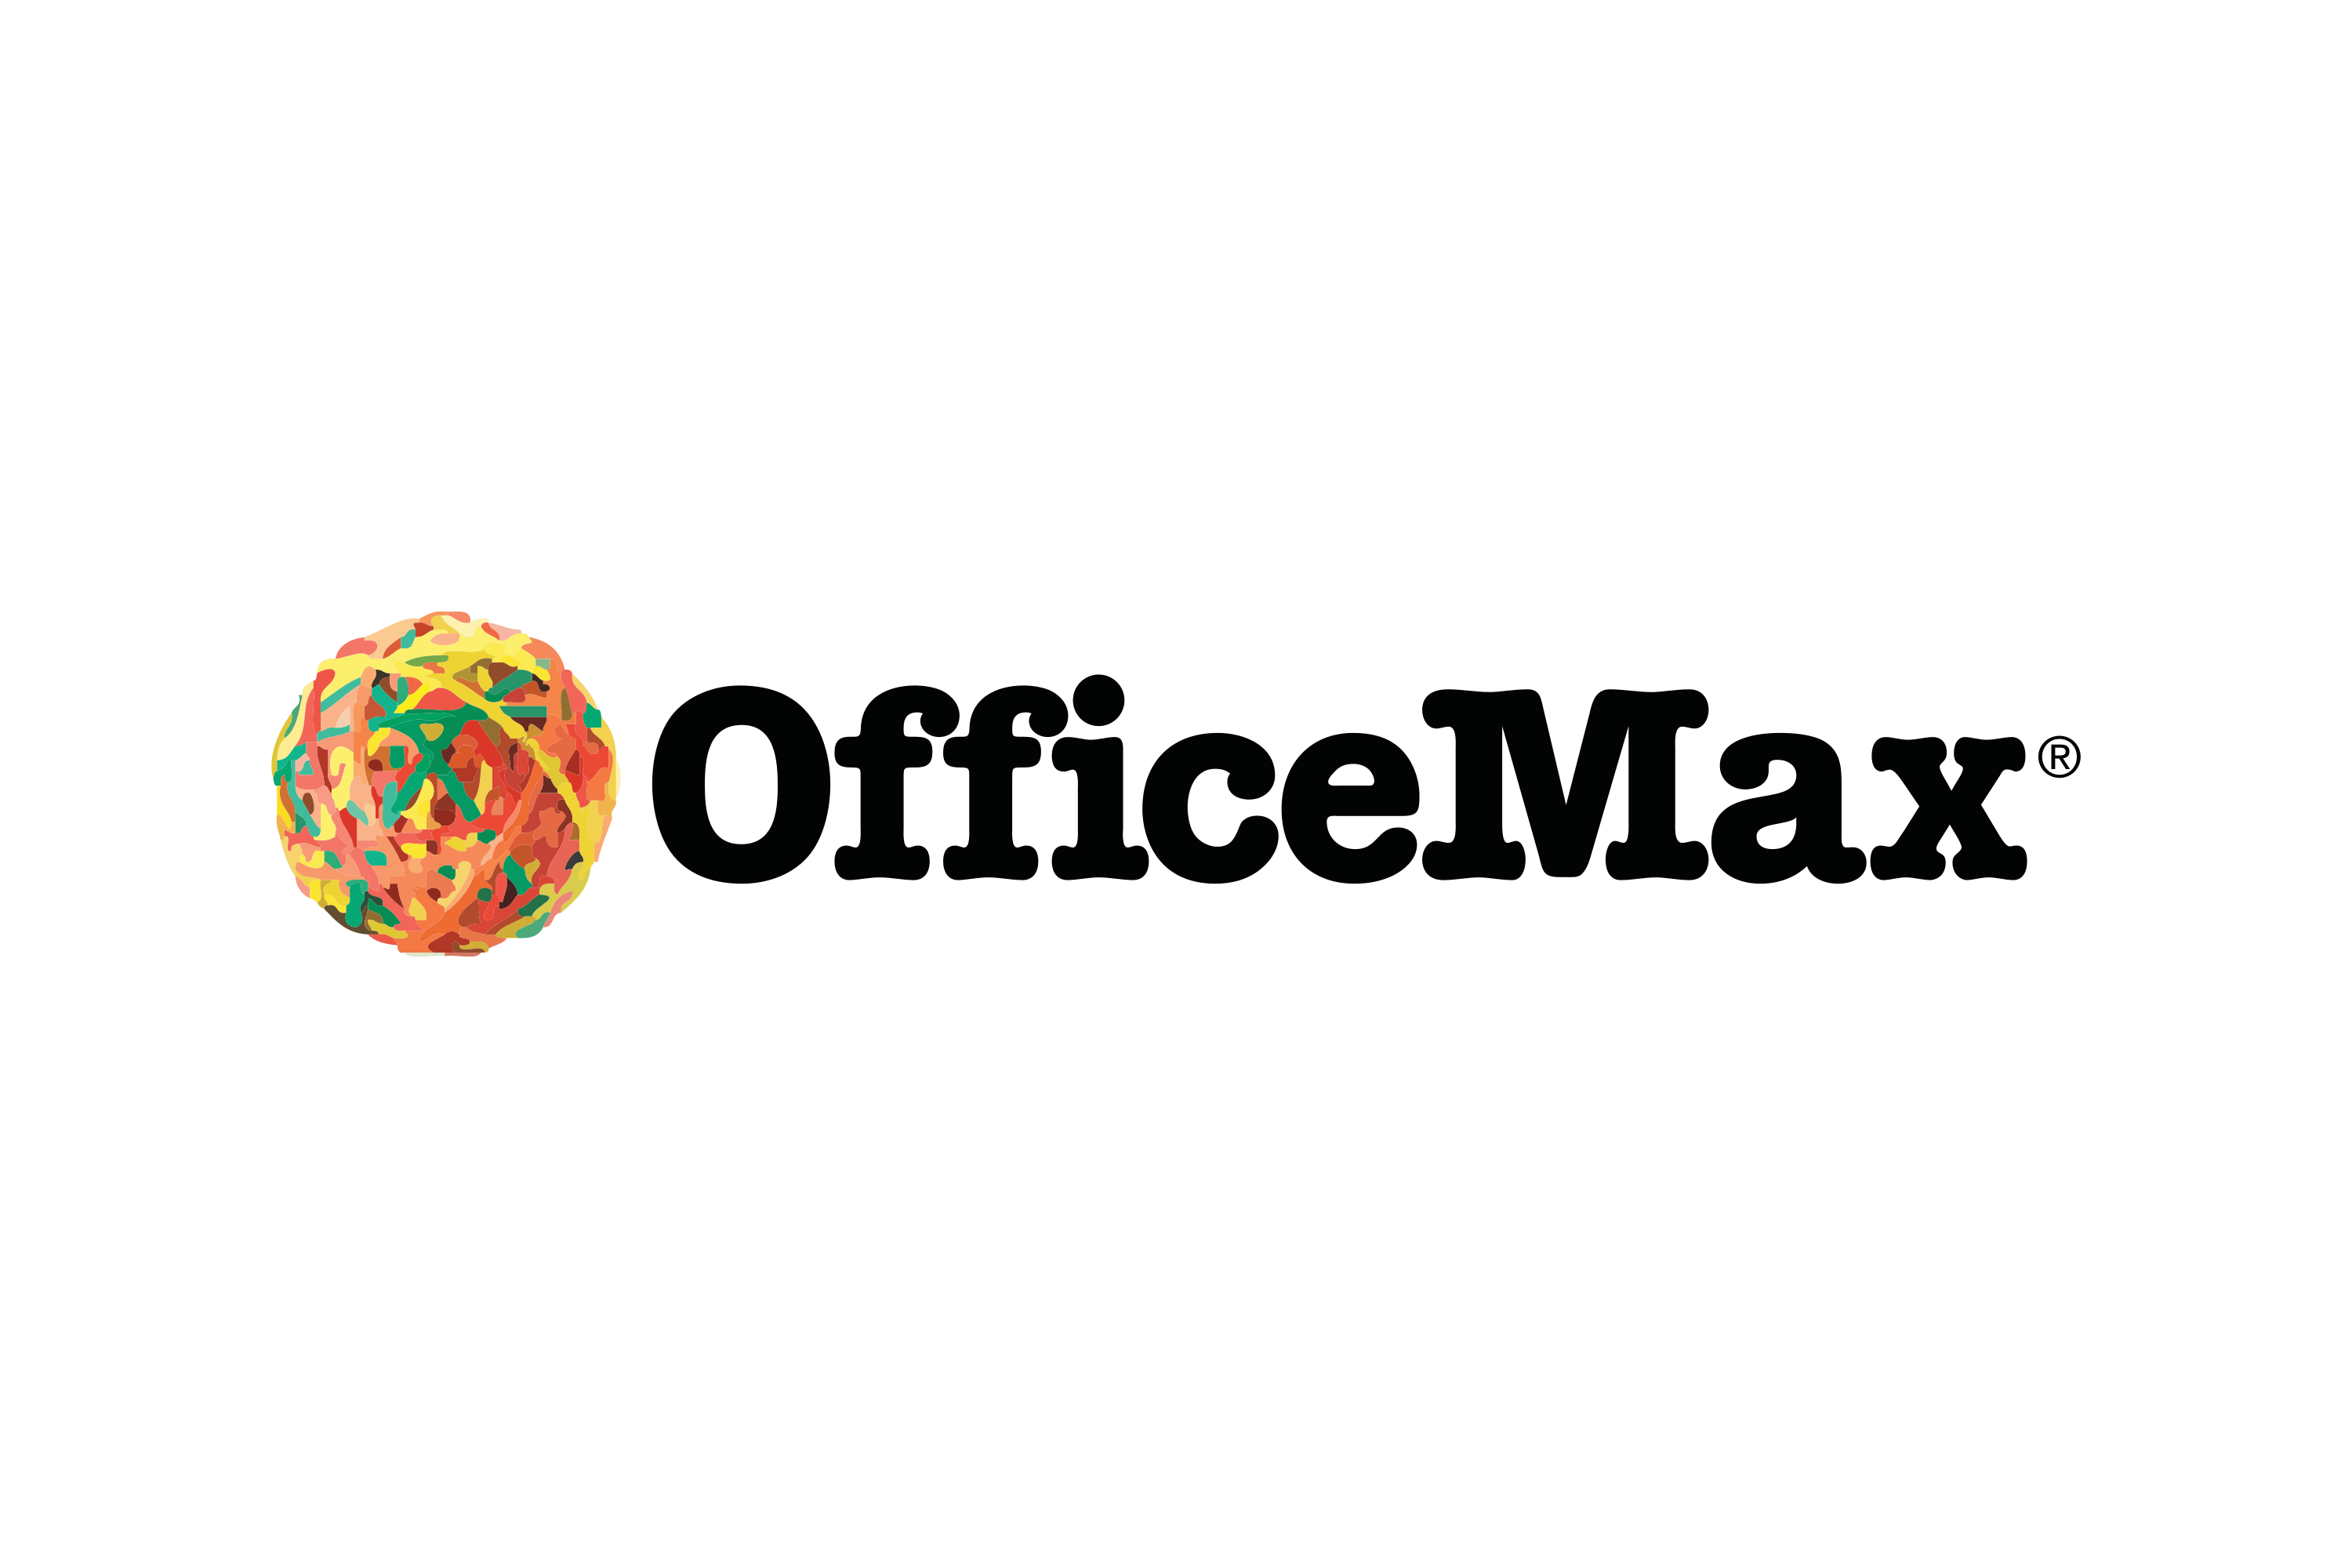 Download OfficeMax Logo in SVG Vector or PNG File Format - Logo.wine